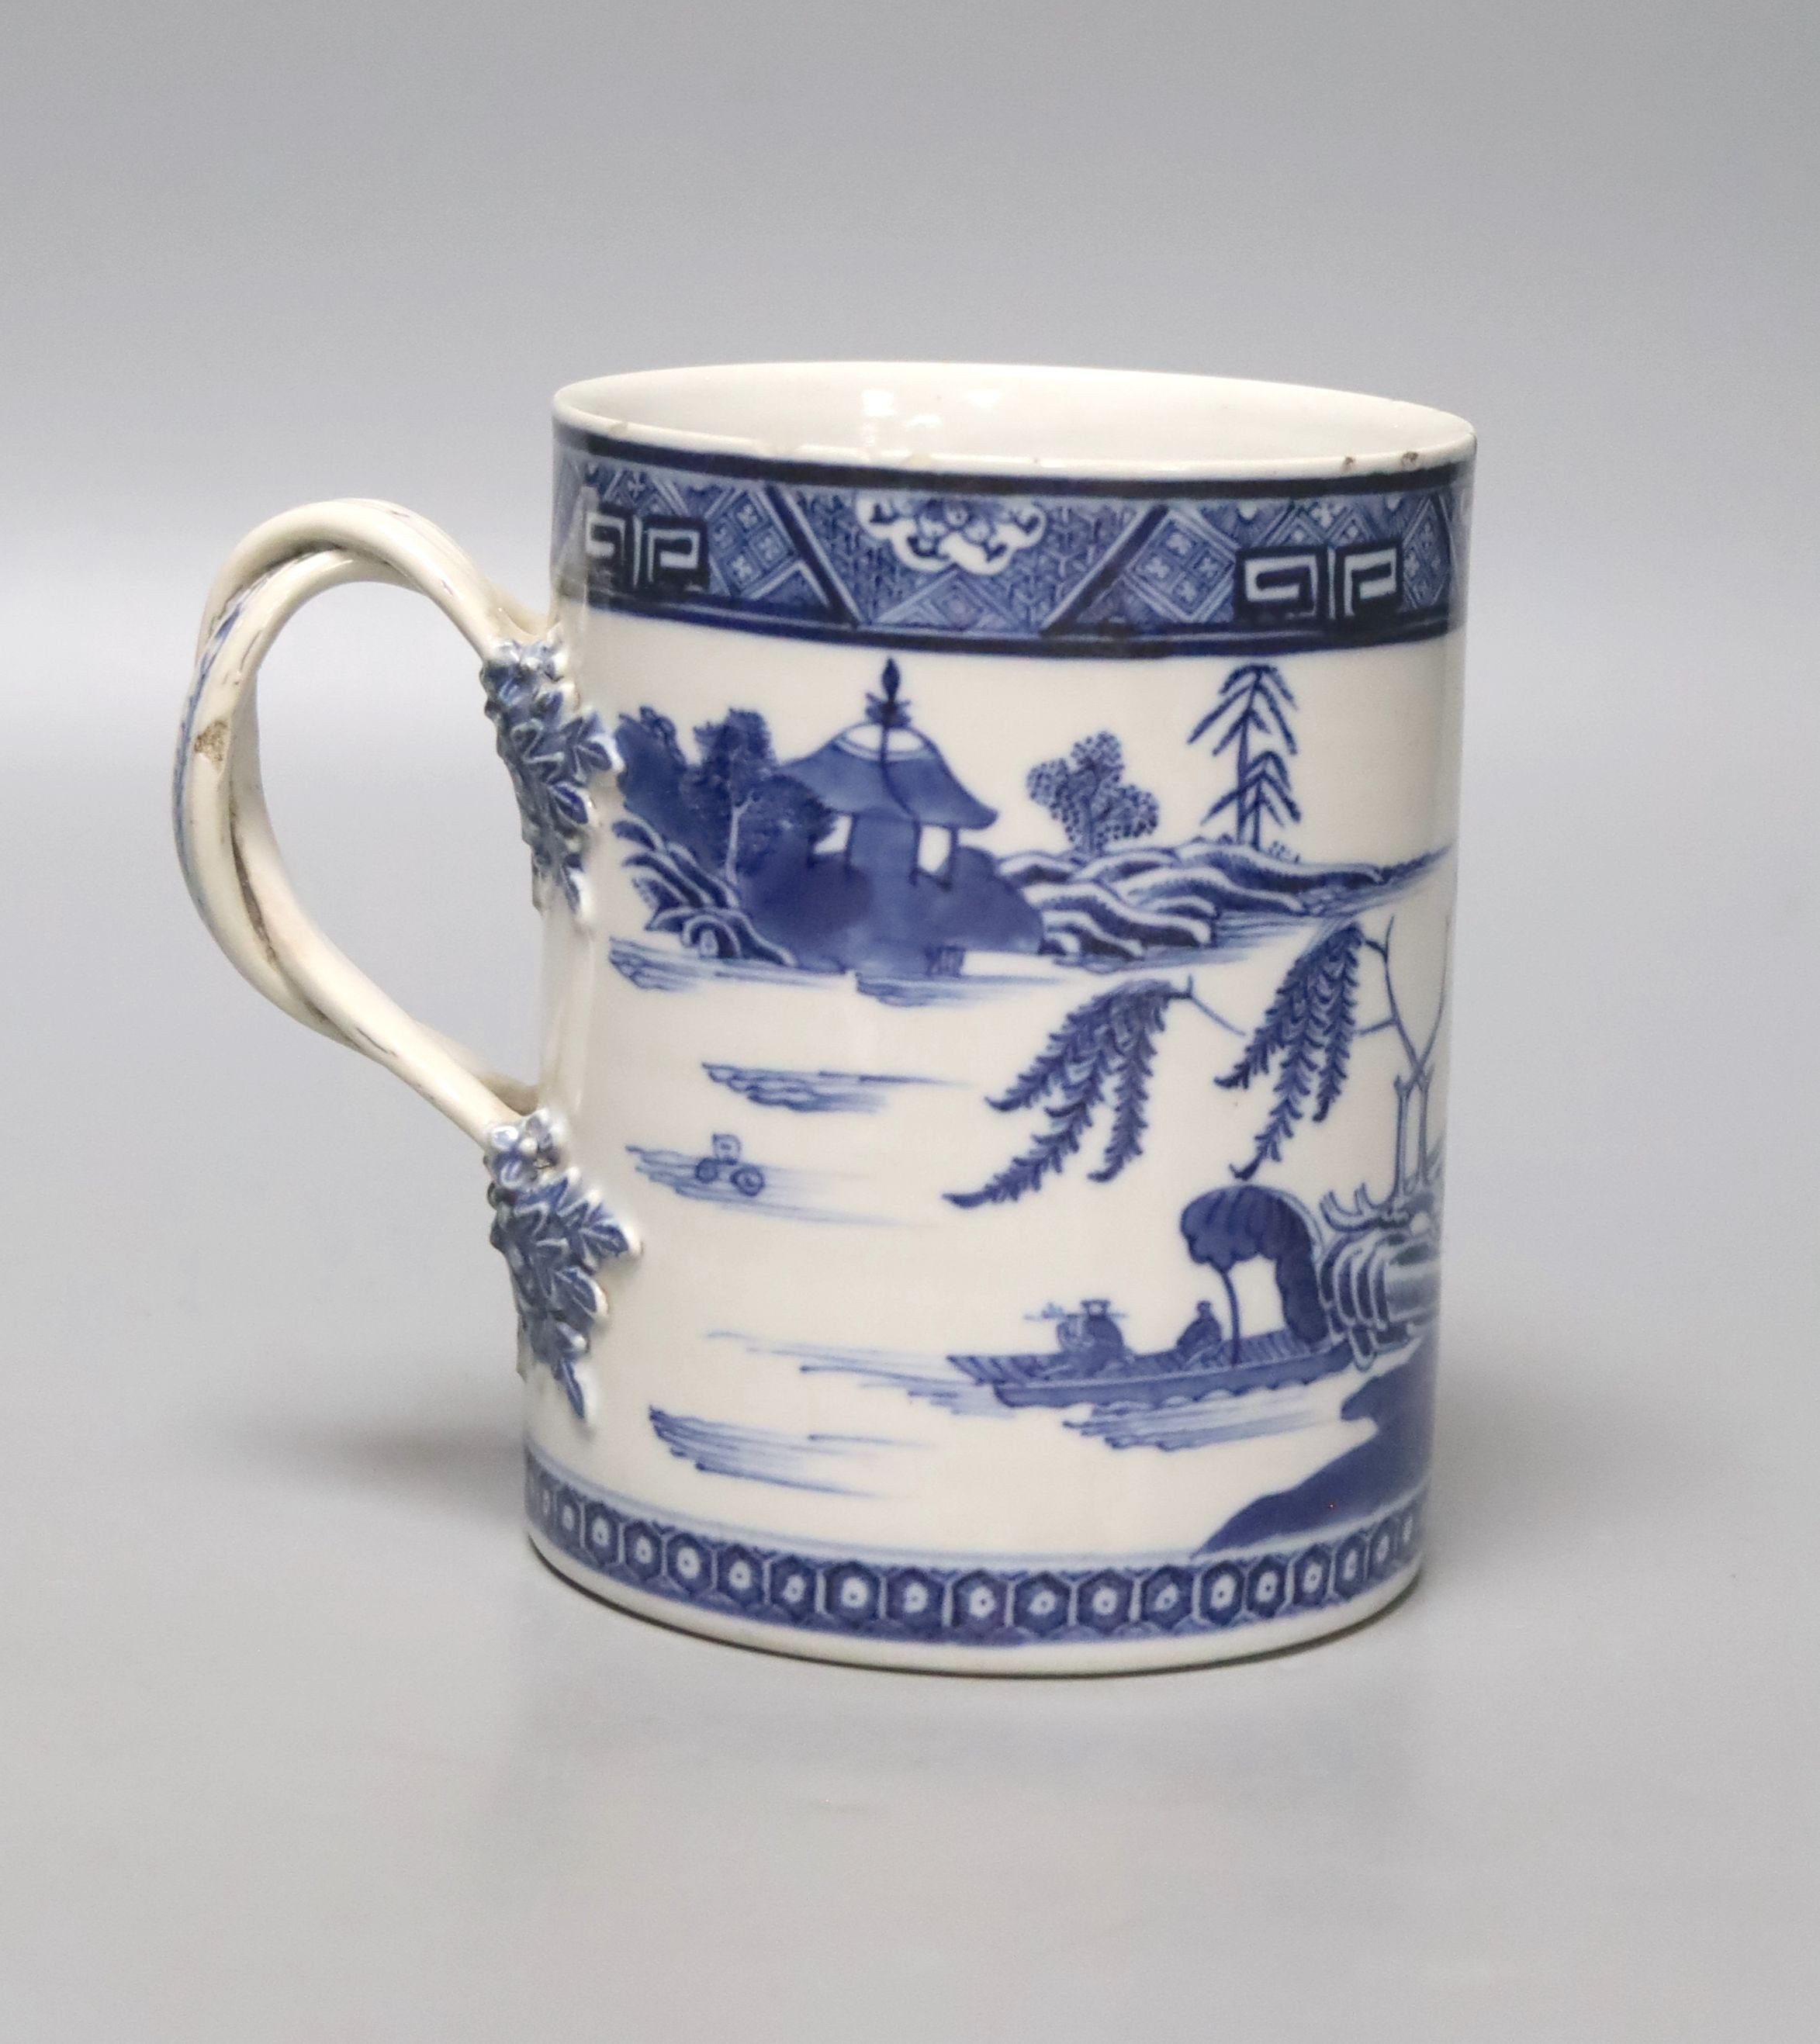 A late 18th century Chinese export blue and white cylindrical mug, with entwined handle, 13cm